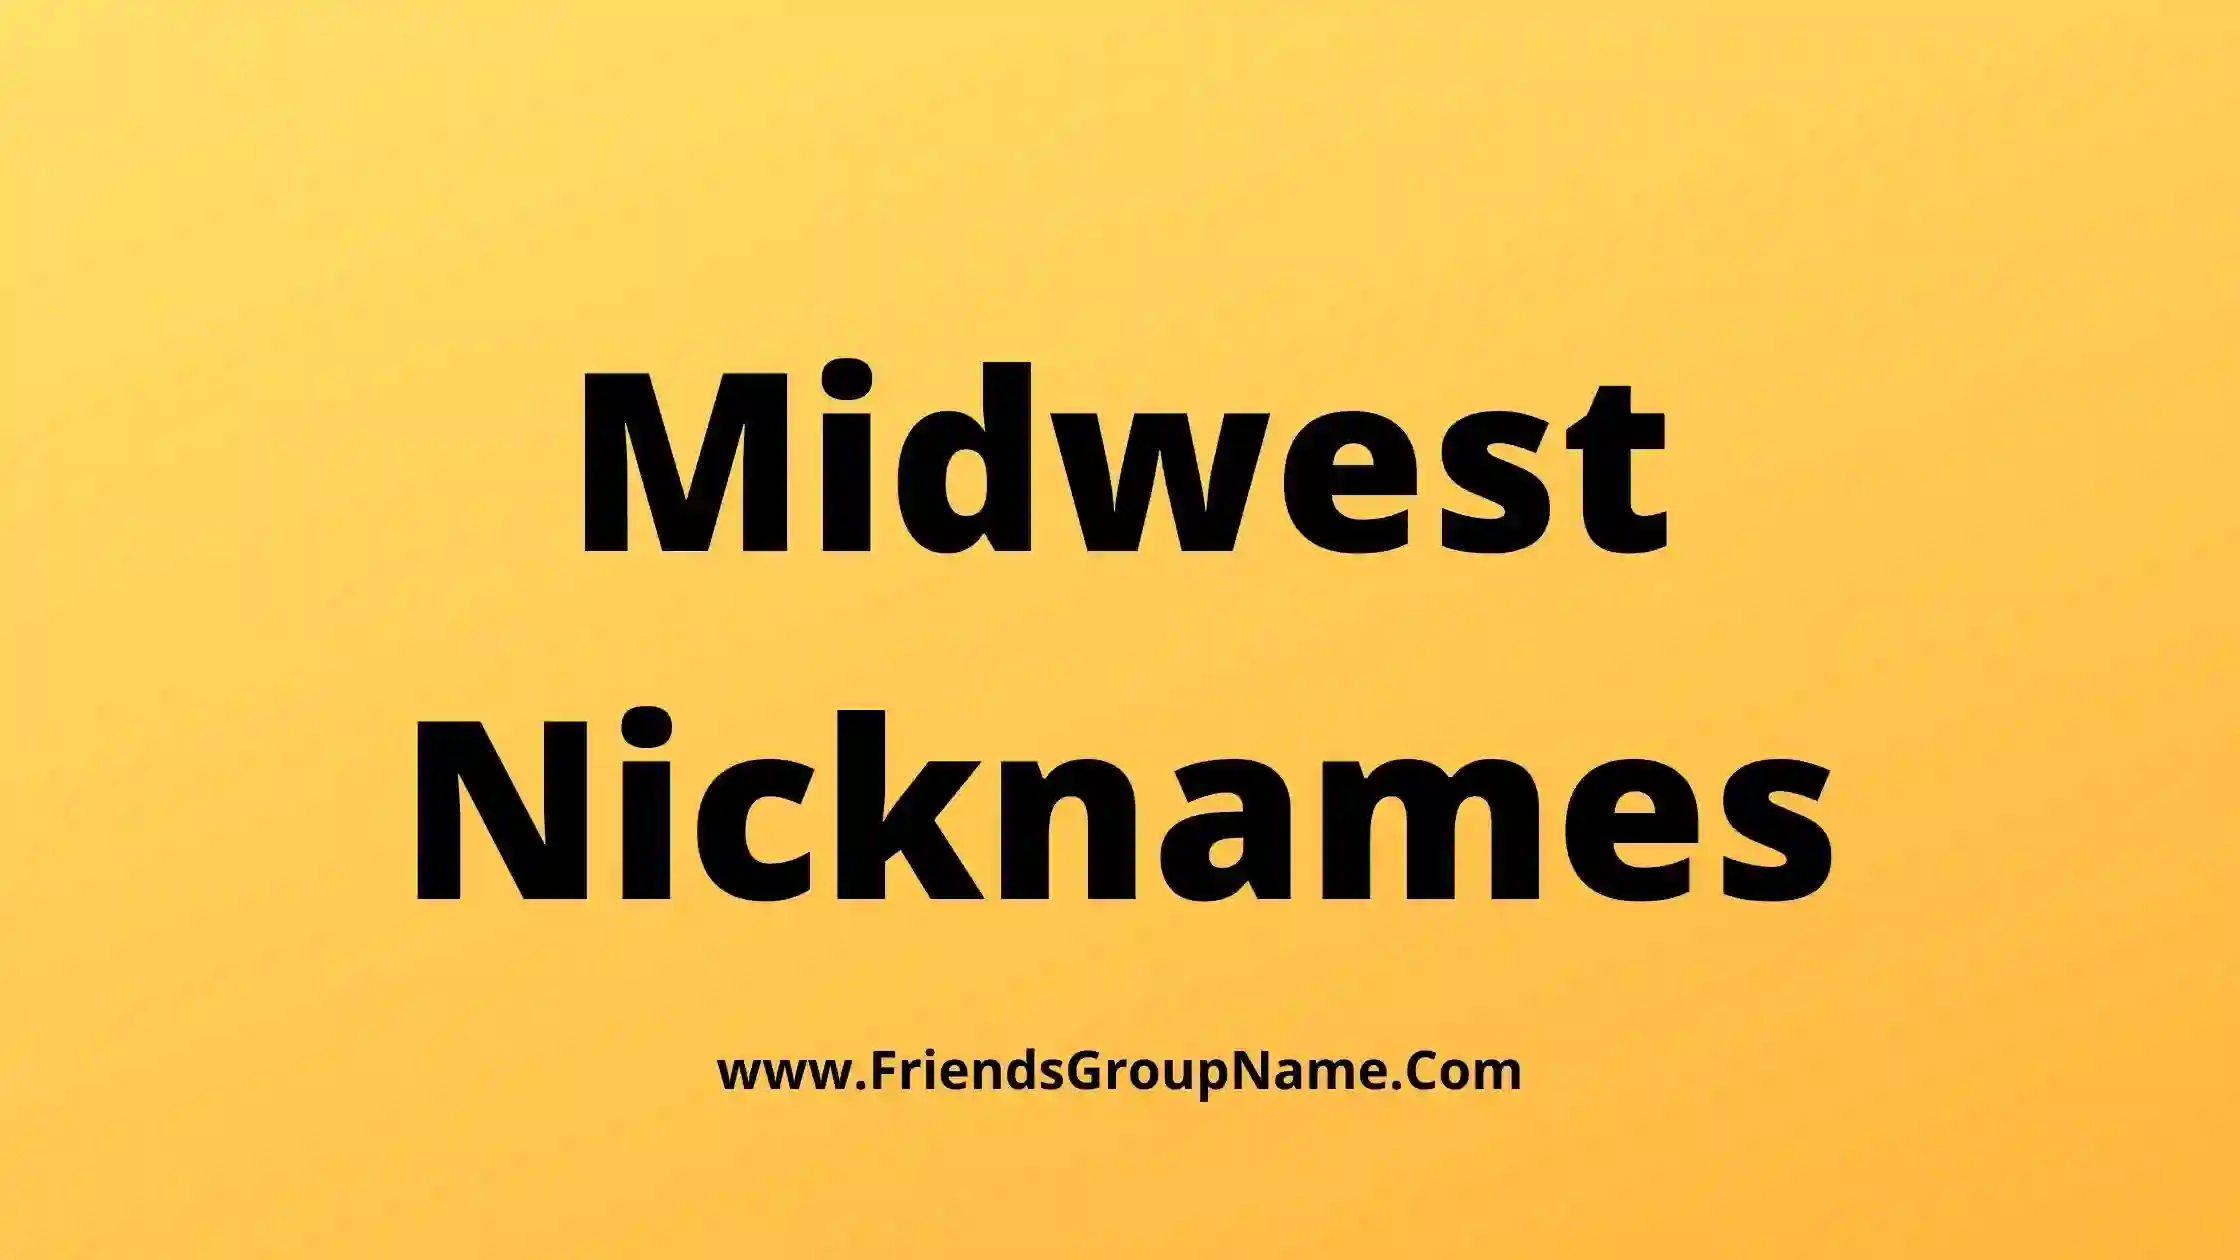 Midwest Nicknames